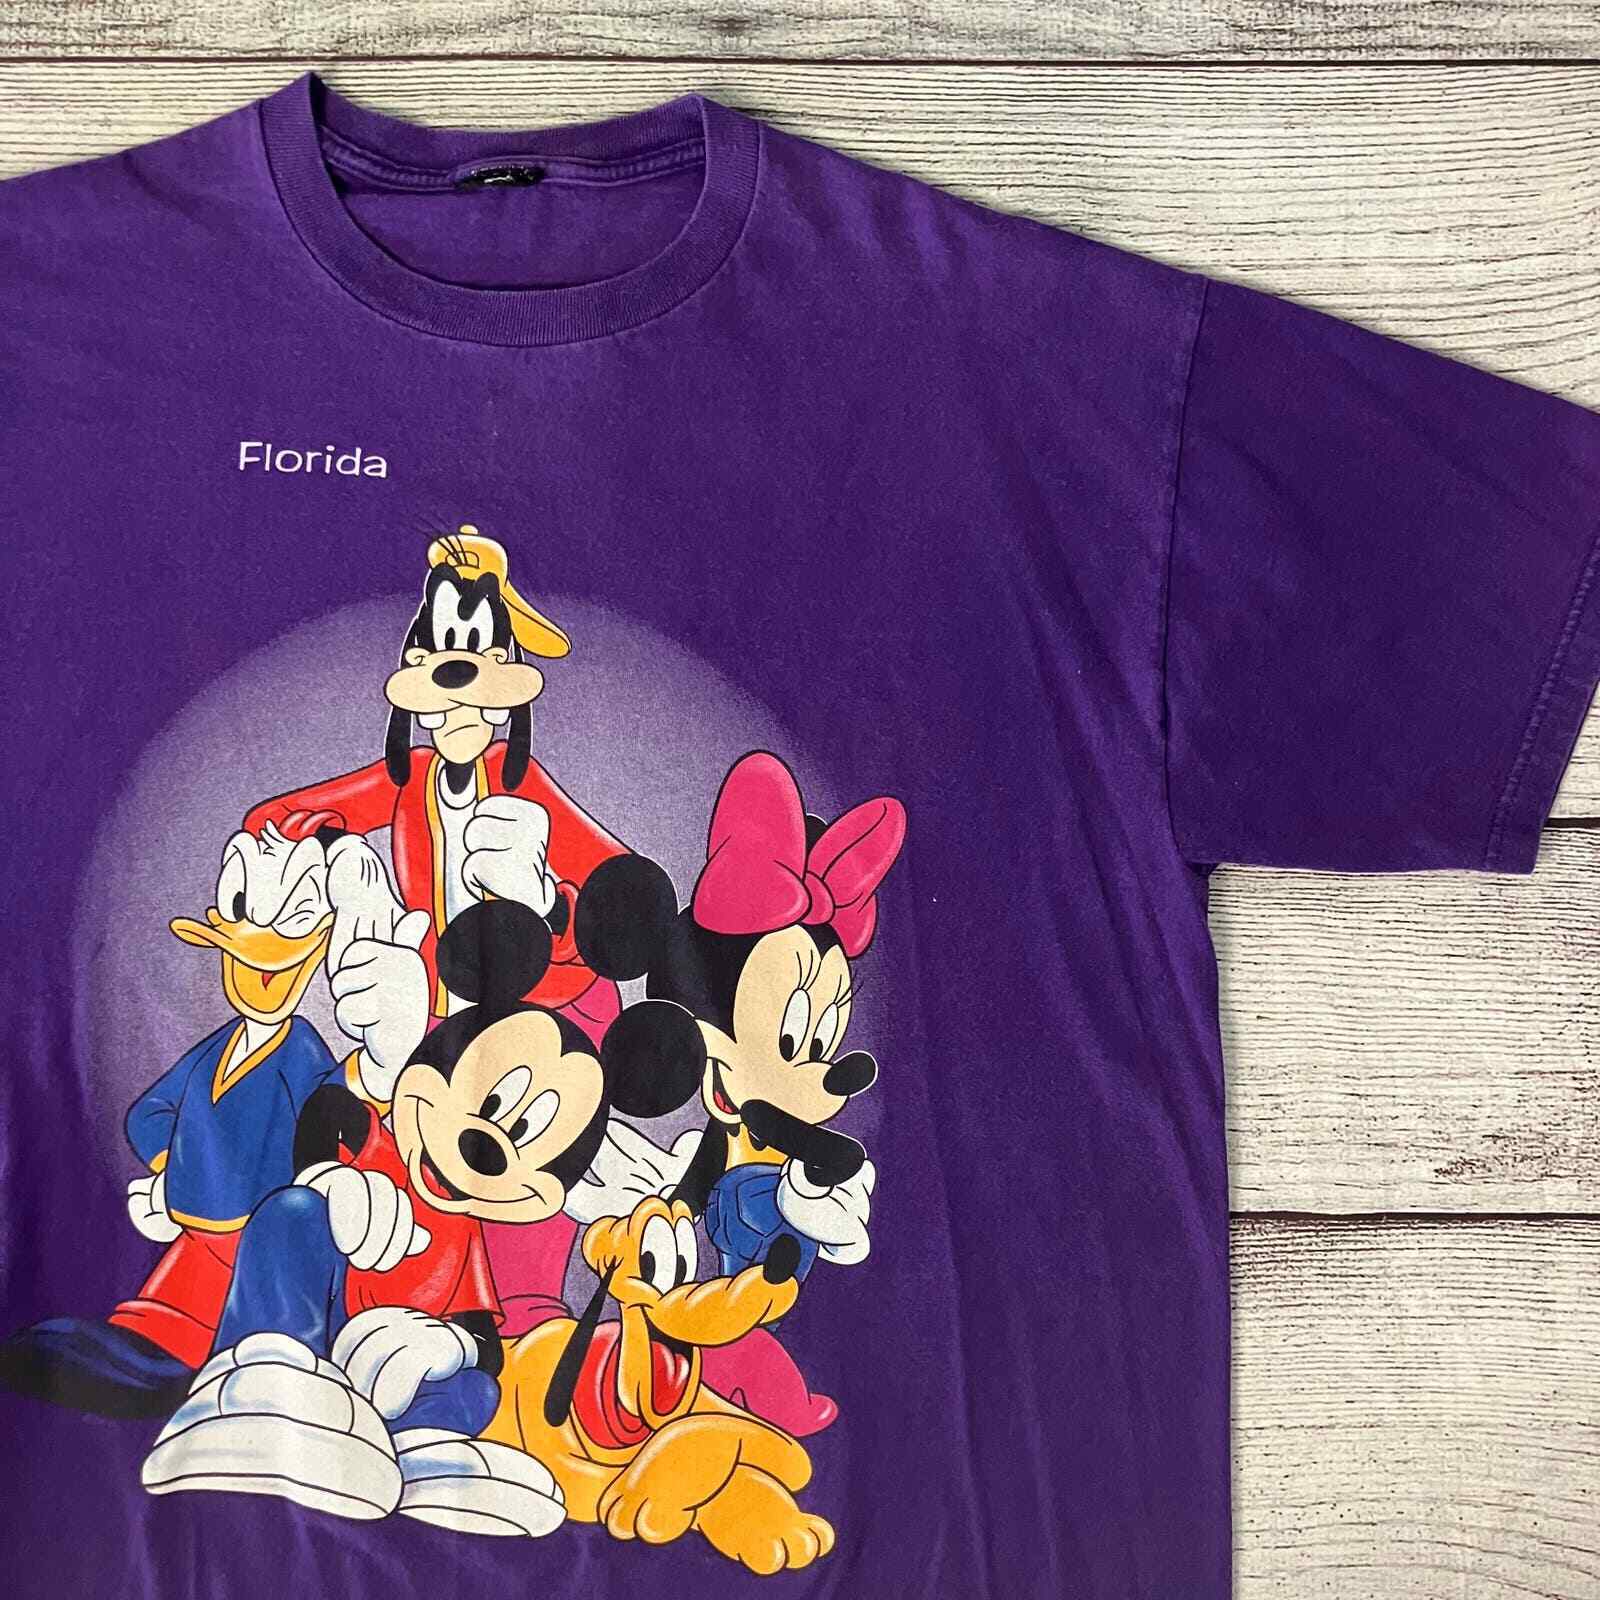 Vintage 1990s Mickey Mouse & Friends Cartoon T-shirt size XL Looney Tunes